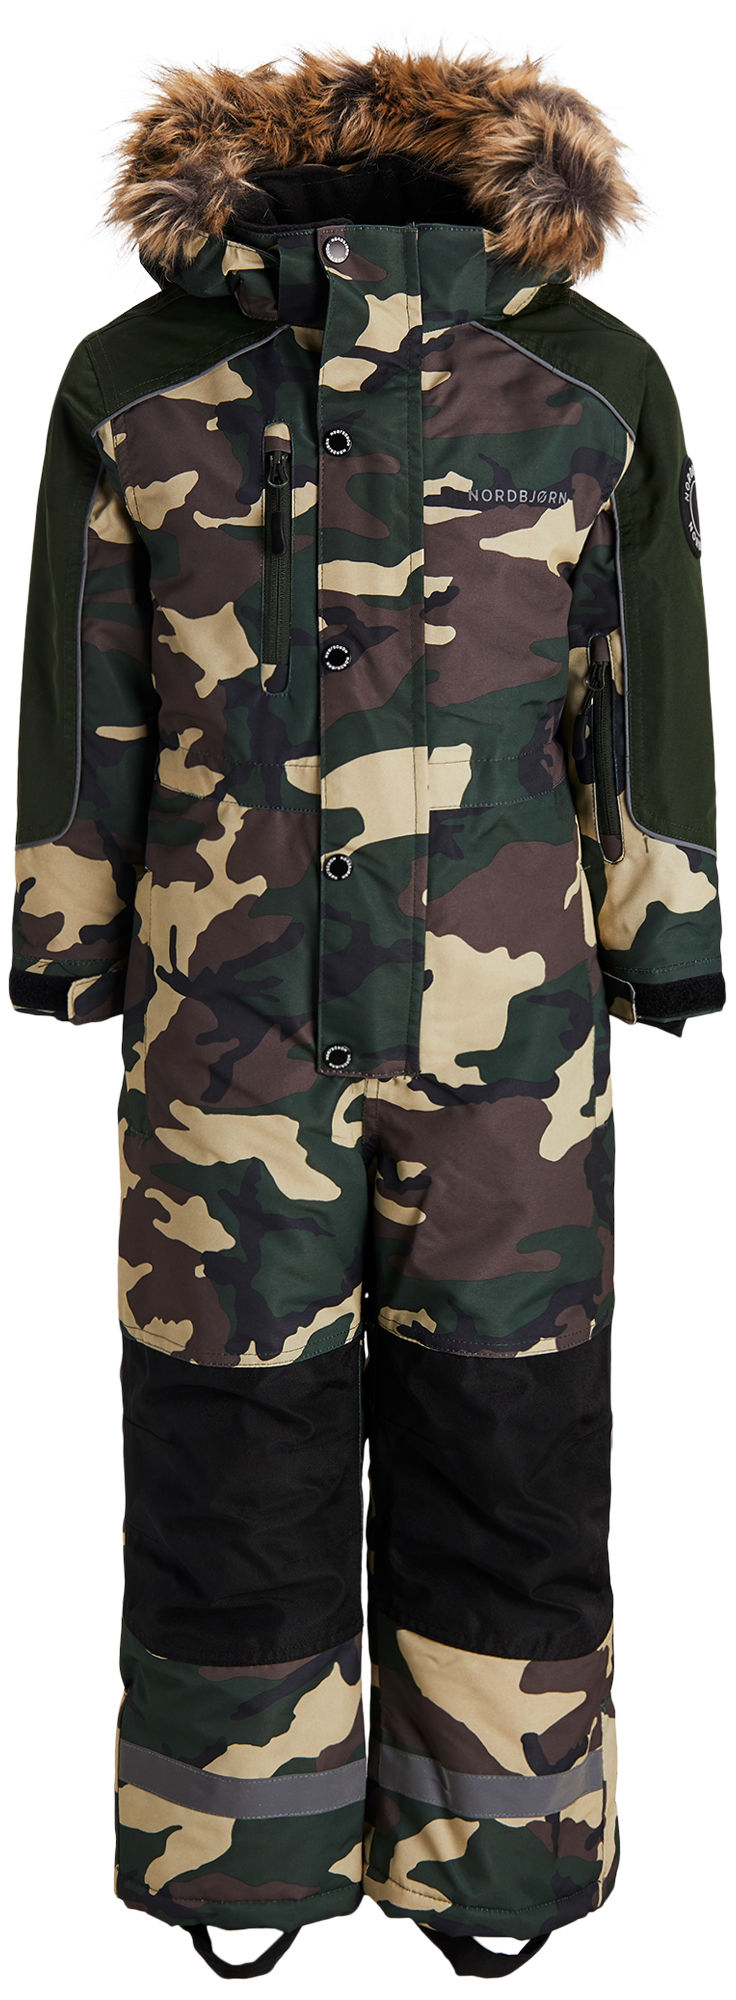 Nordbjörn Arctic Overall, Camouflage 90